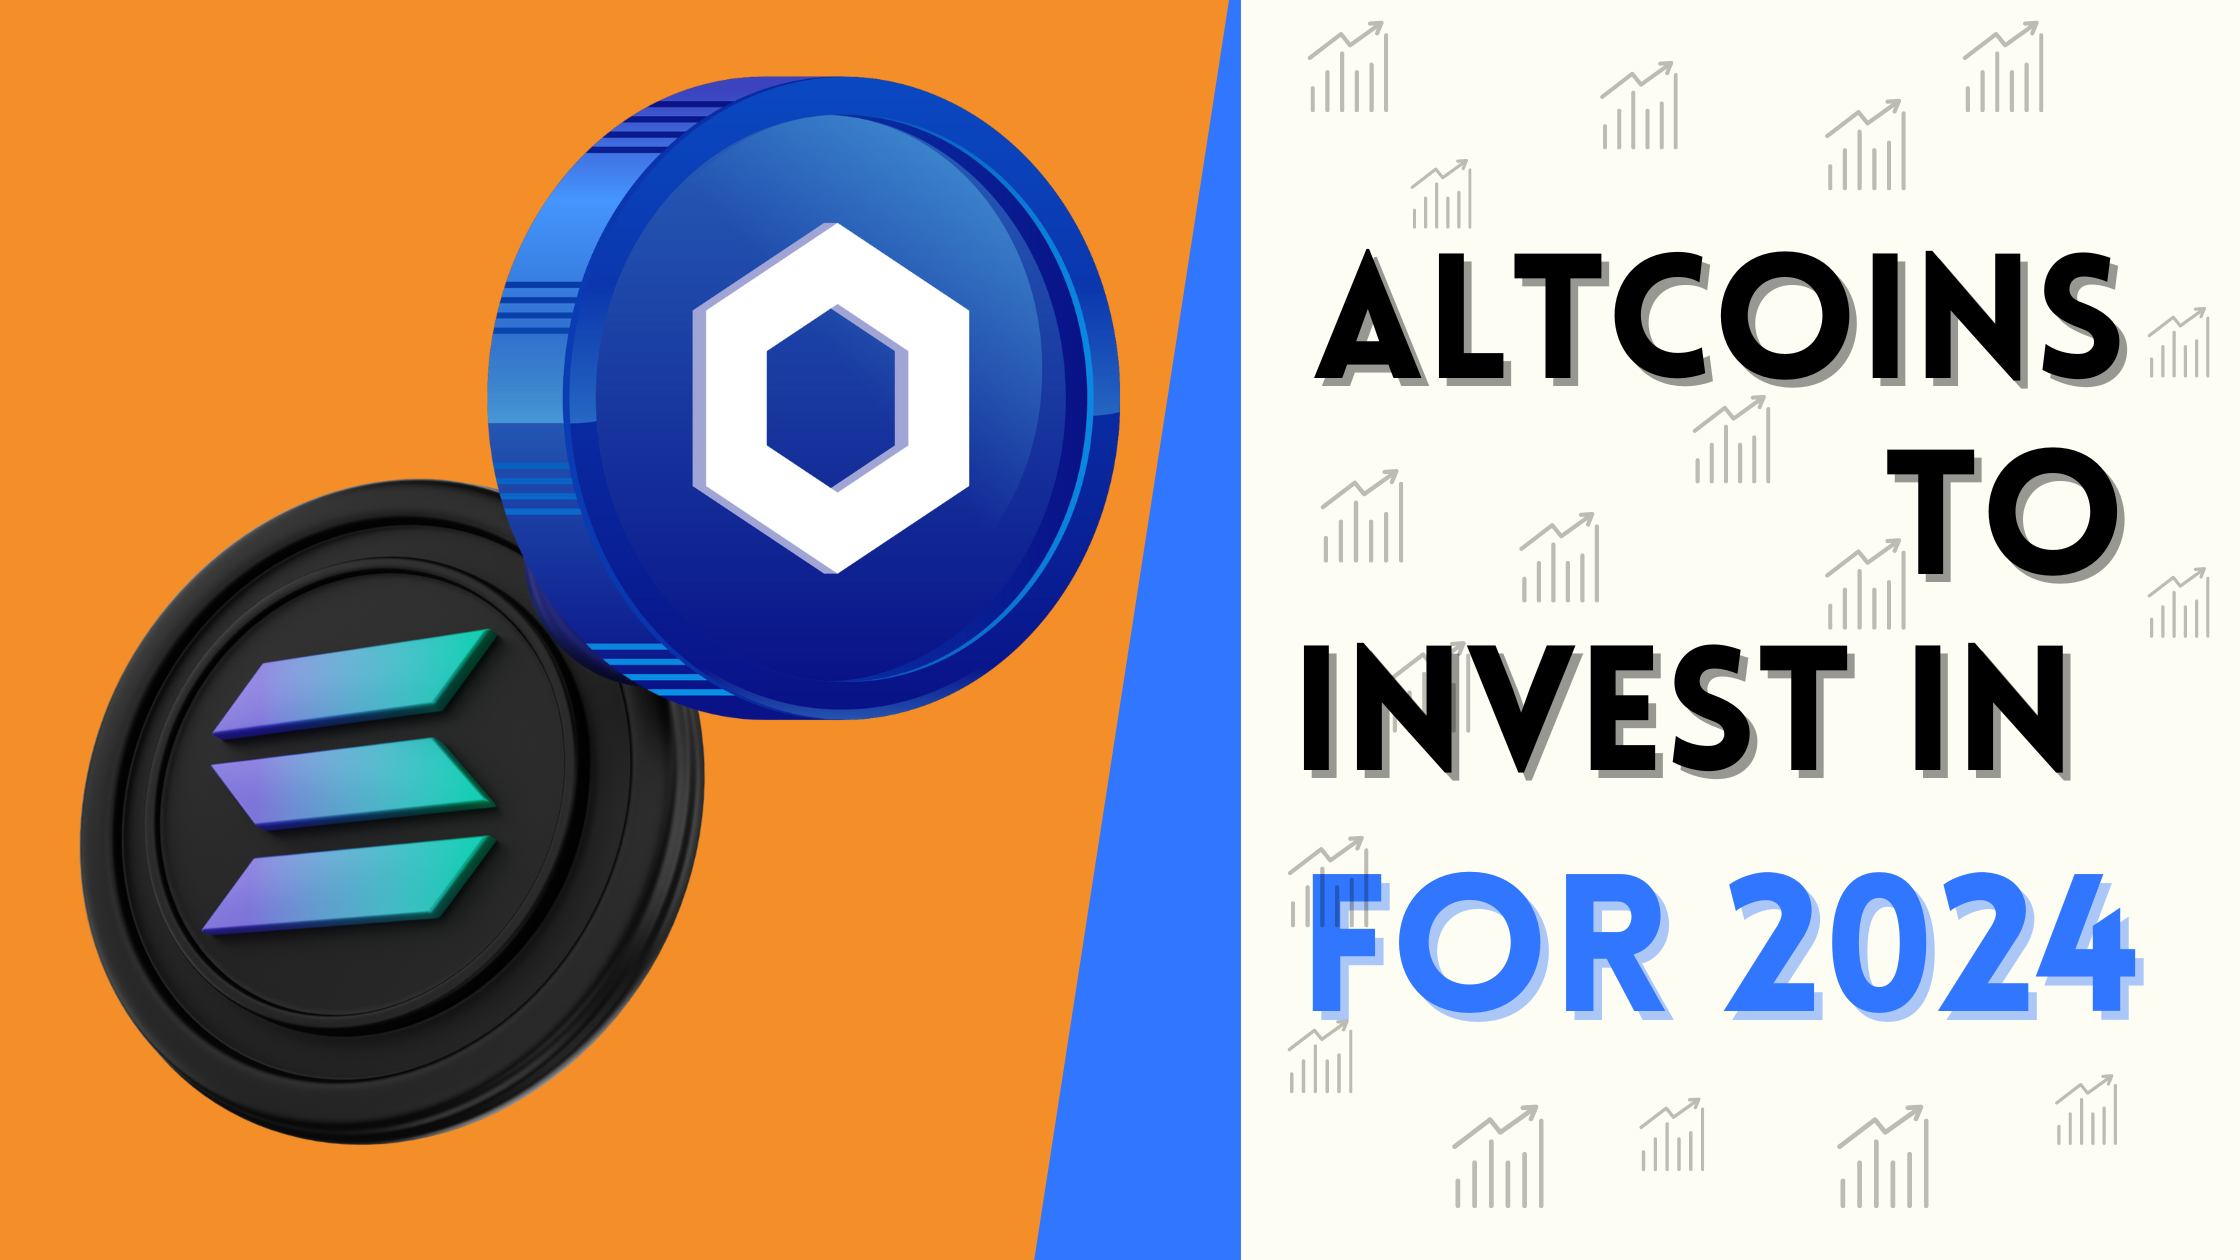 Altcoins to invest in for 2024